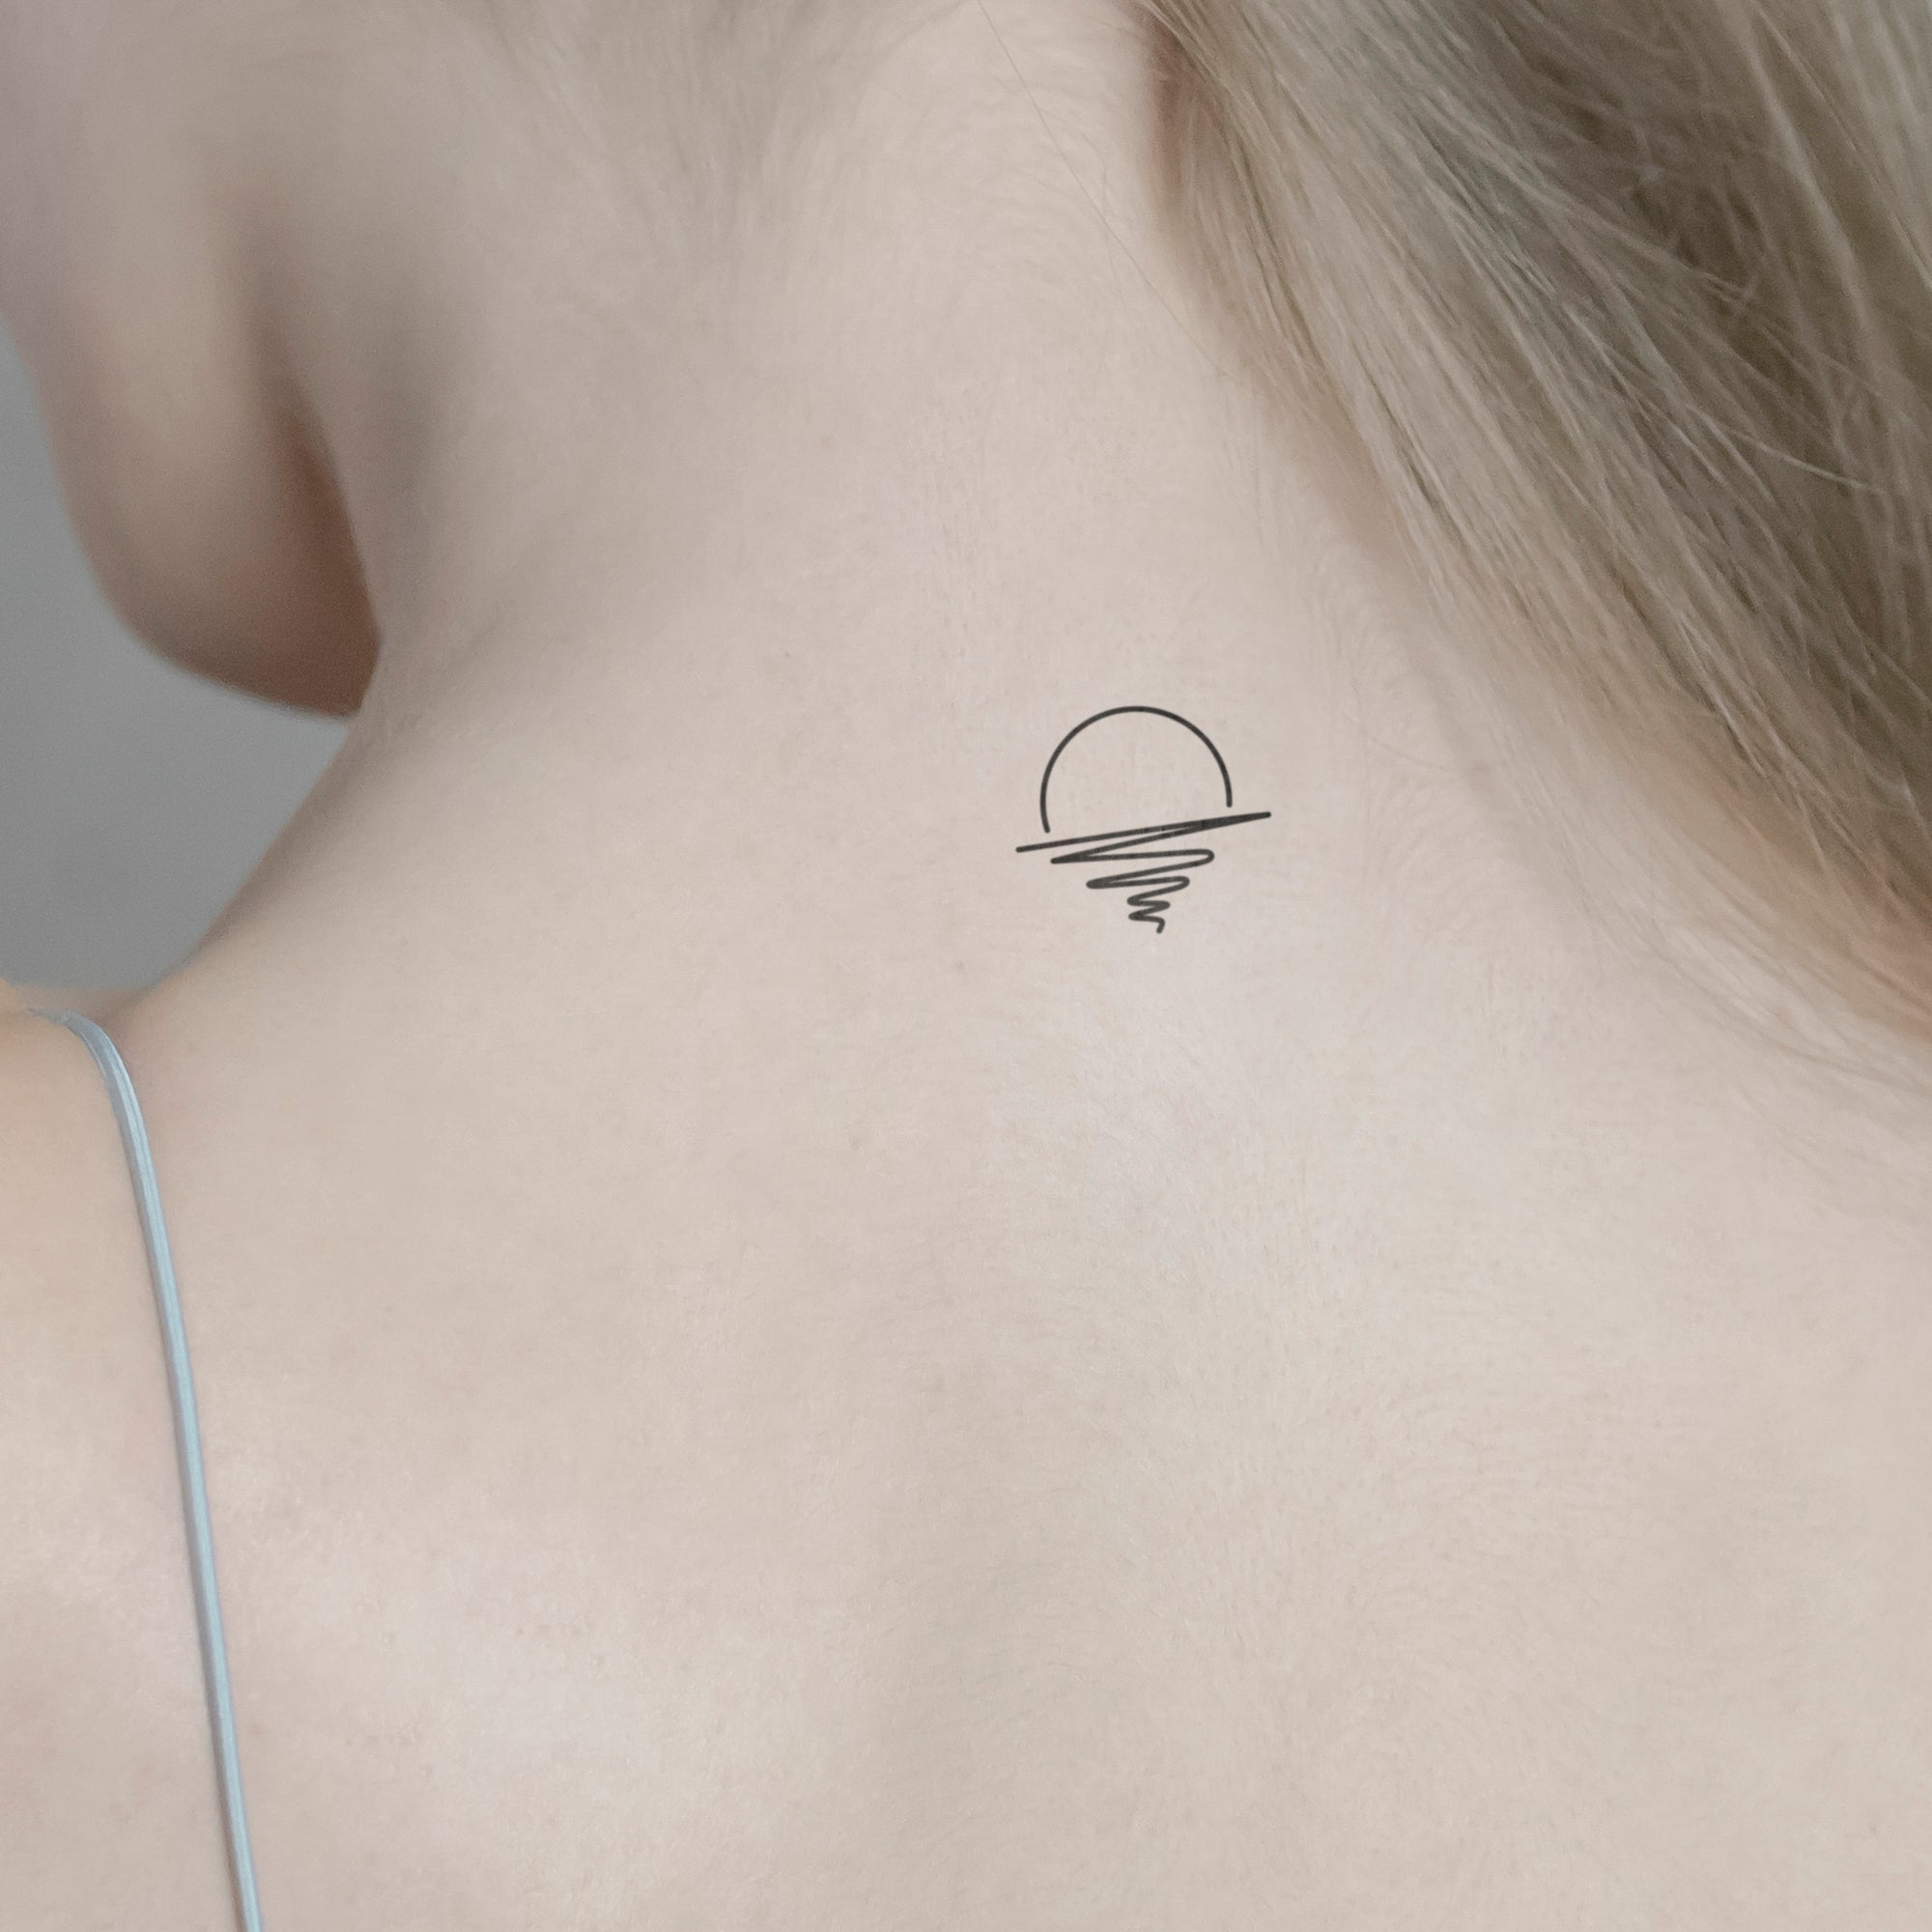 The Sun Tattoo With Minimal and Abstract Design - Etsy Israel